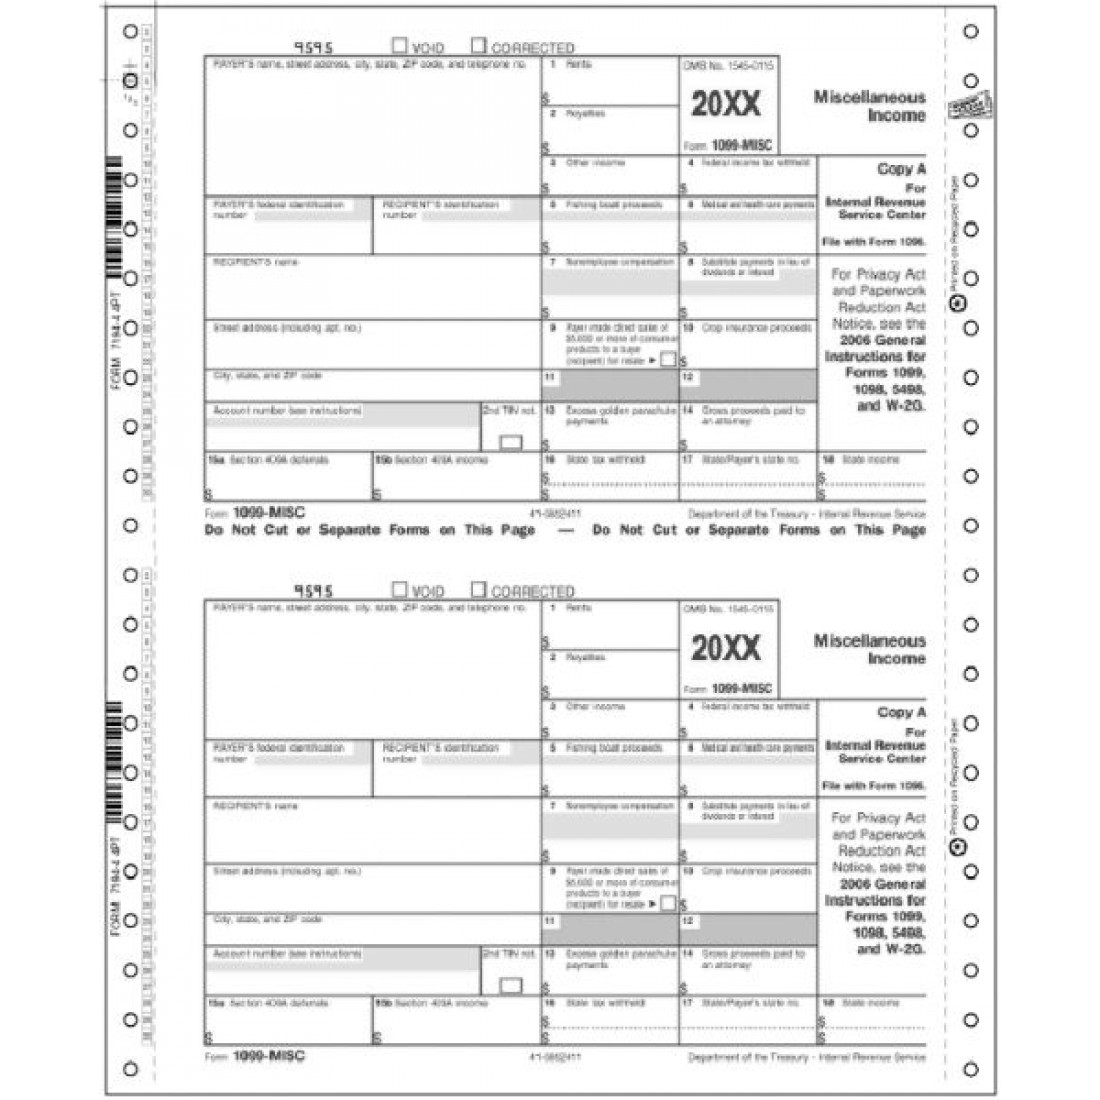 Continuous 1099 MISC IRS Tax Forms | Free Shipping